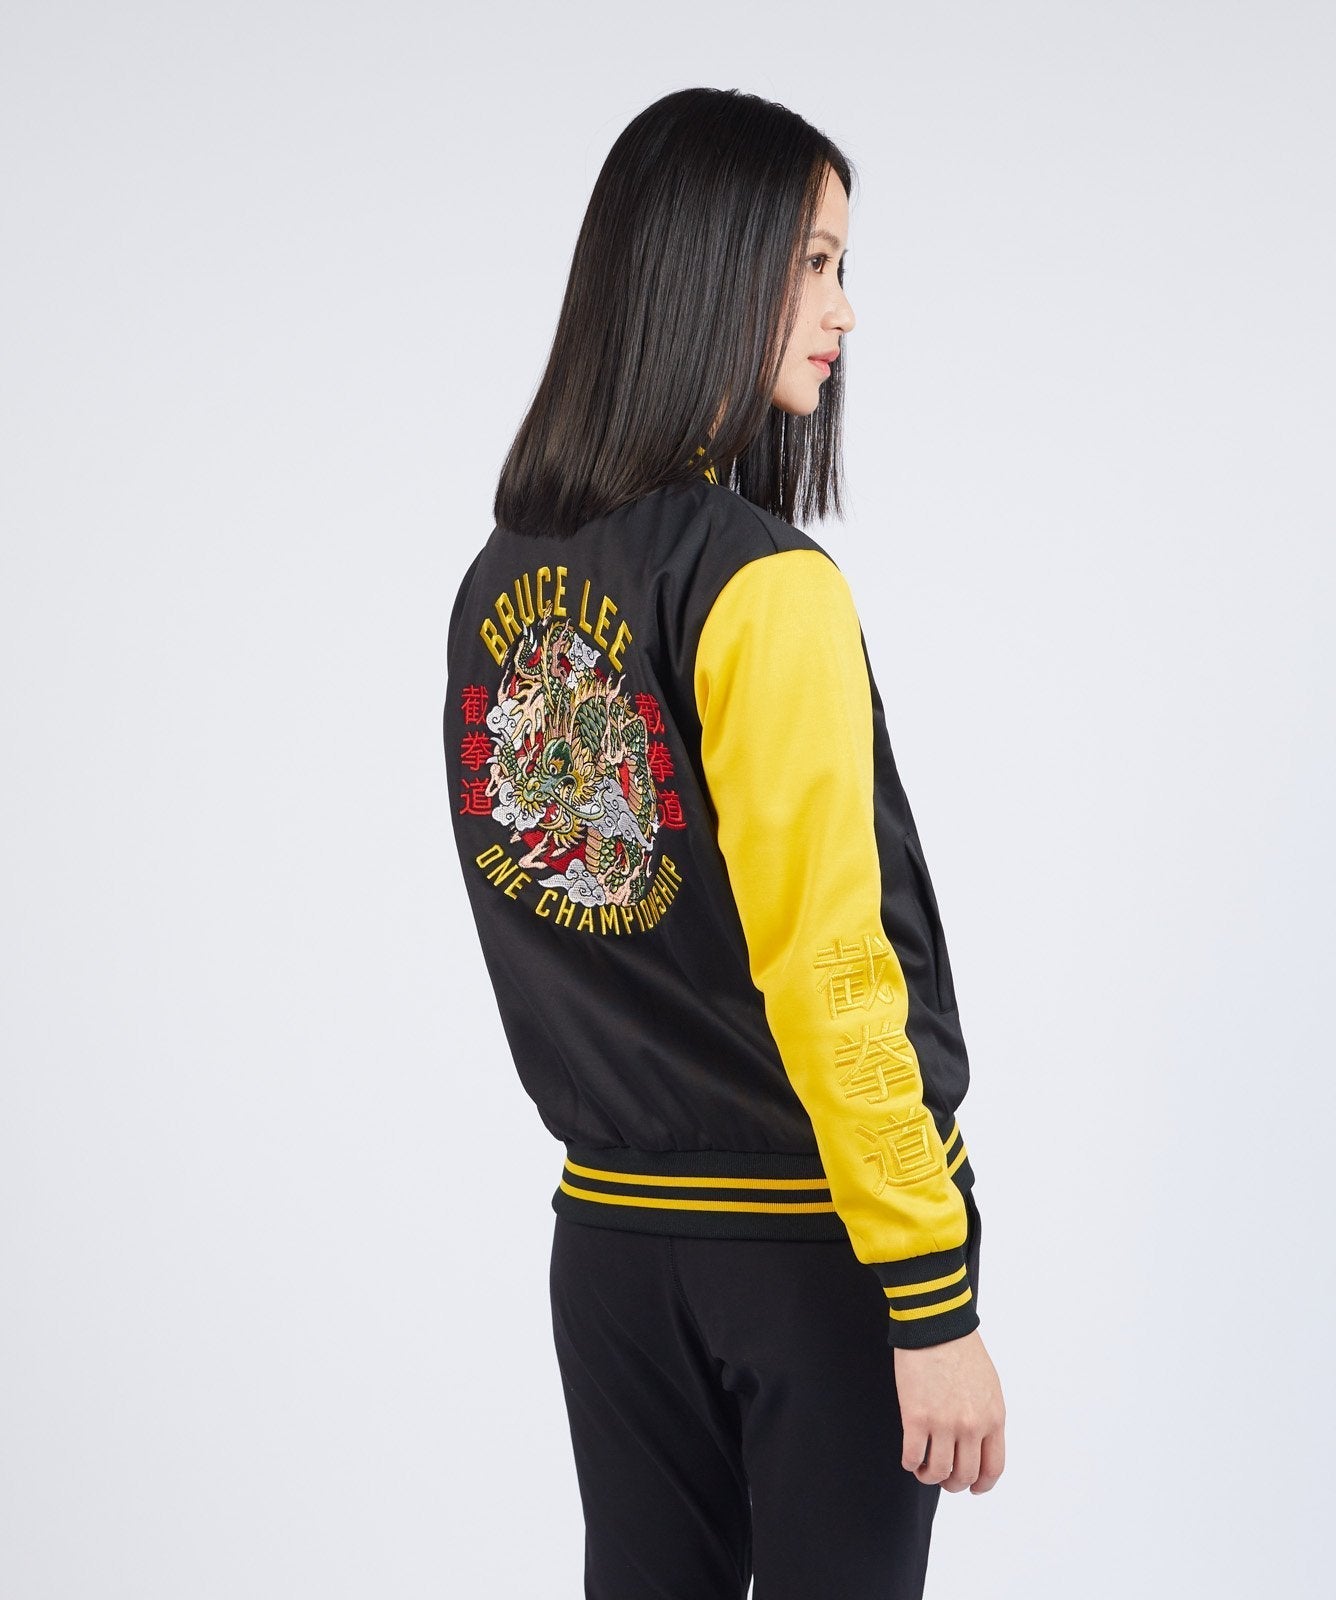 ONE Varsity Jacket Official Bruce Lee The Dragon - Budo Online